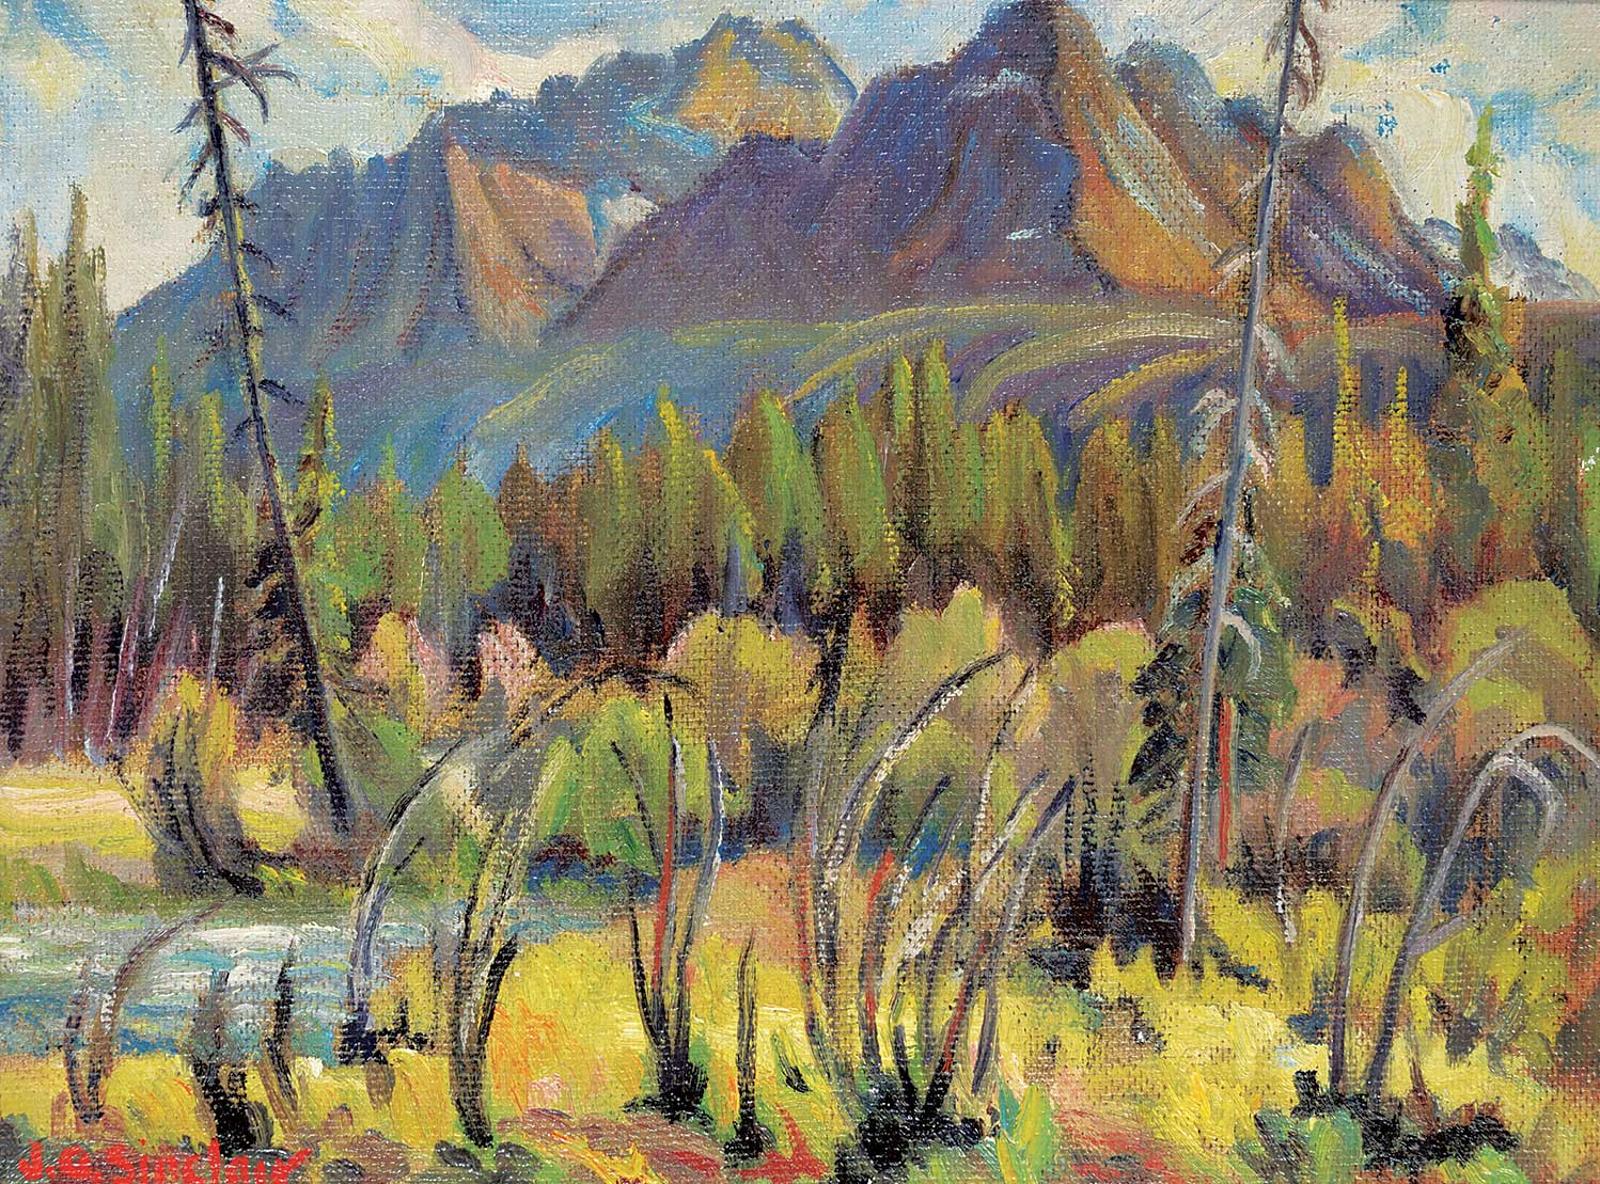 John Gordon Sinclair (1889-1980) - Untitled - Mountains in the Distance